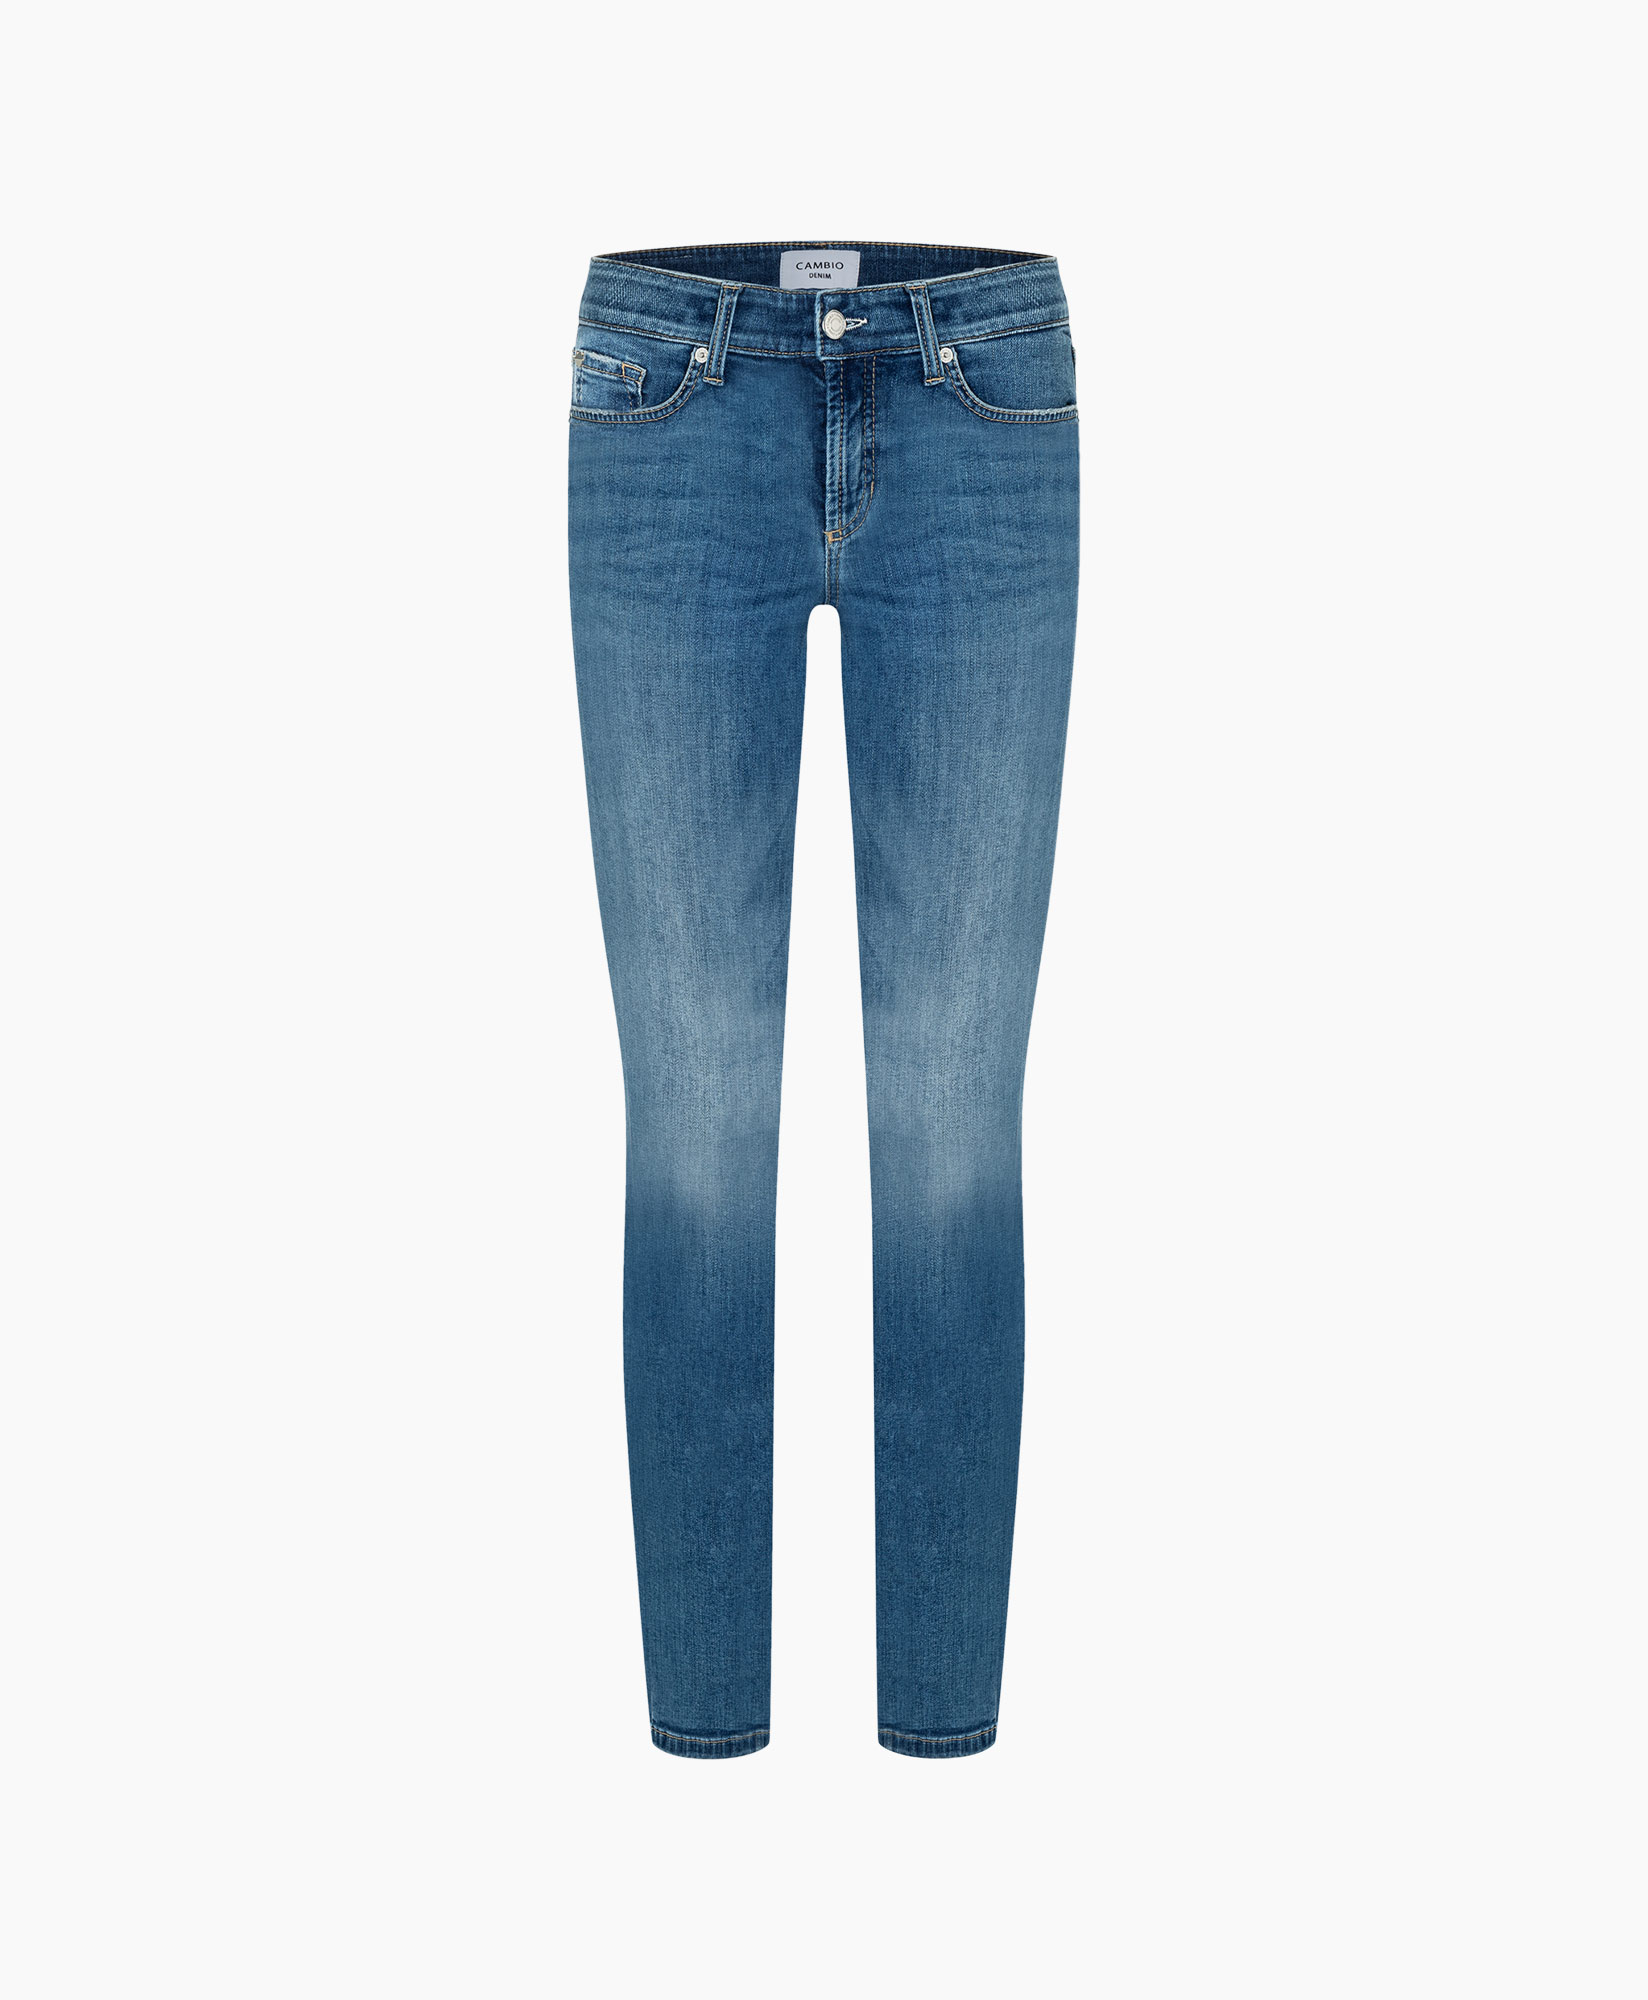 Jeans Piper Authentic Highrise Superstretch midden blauw